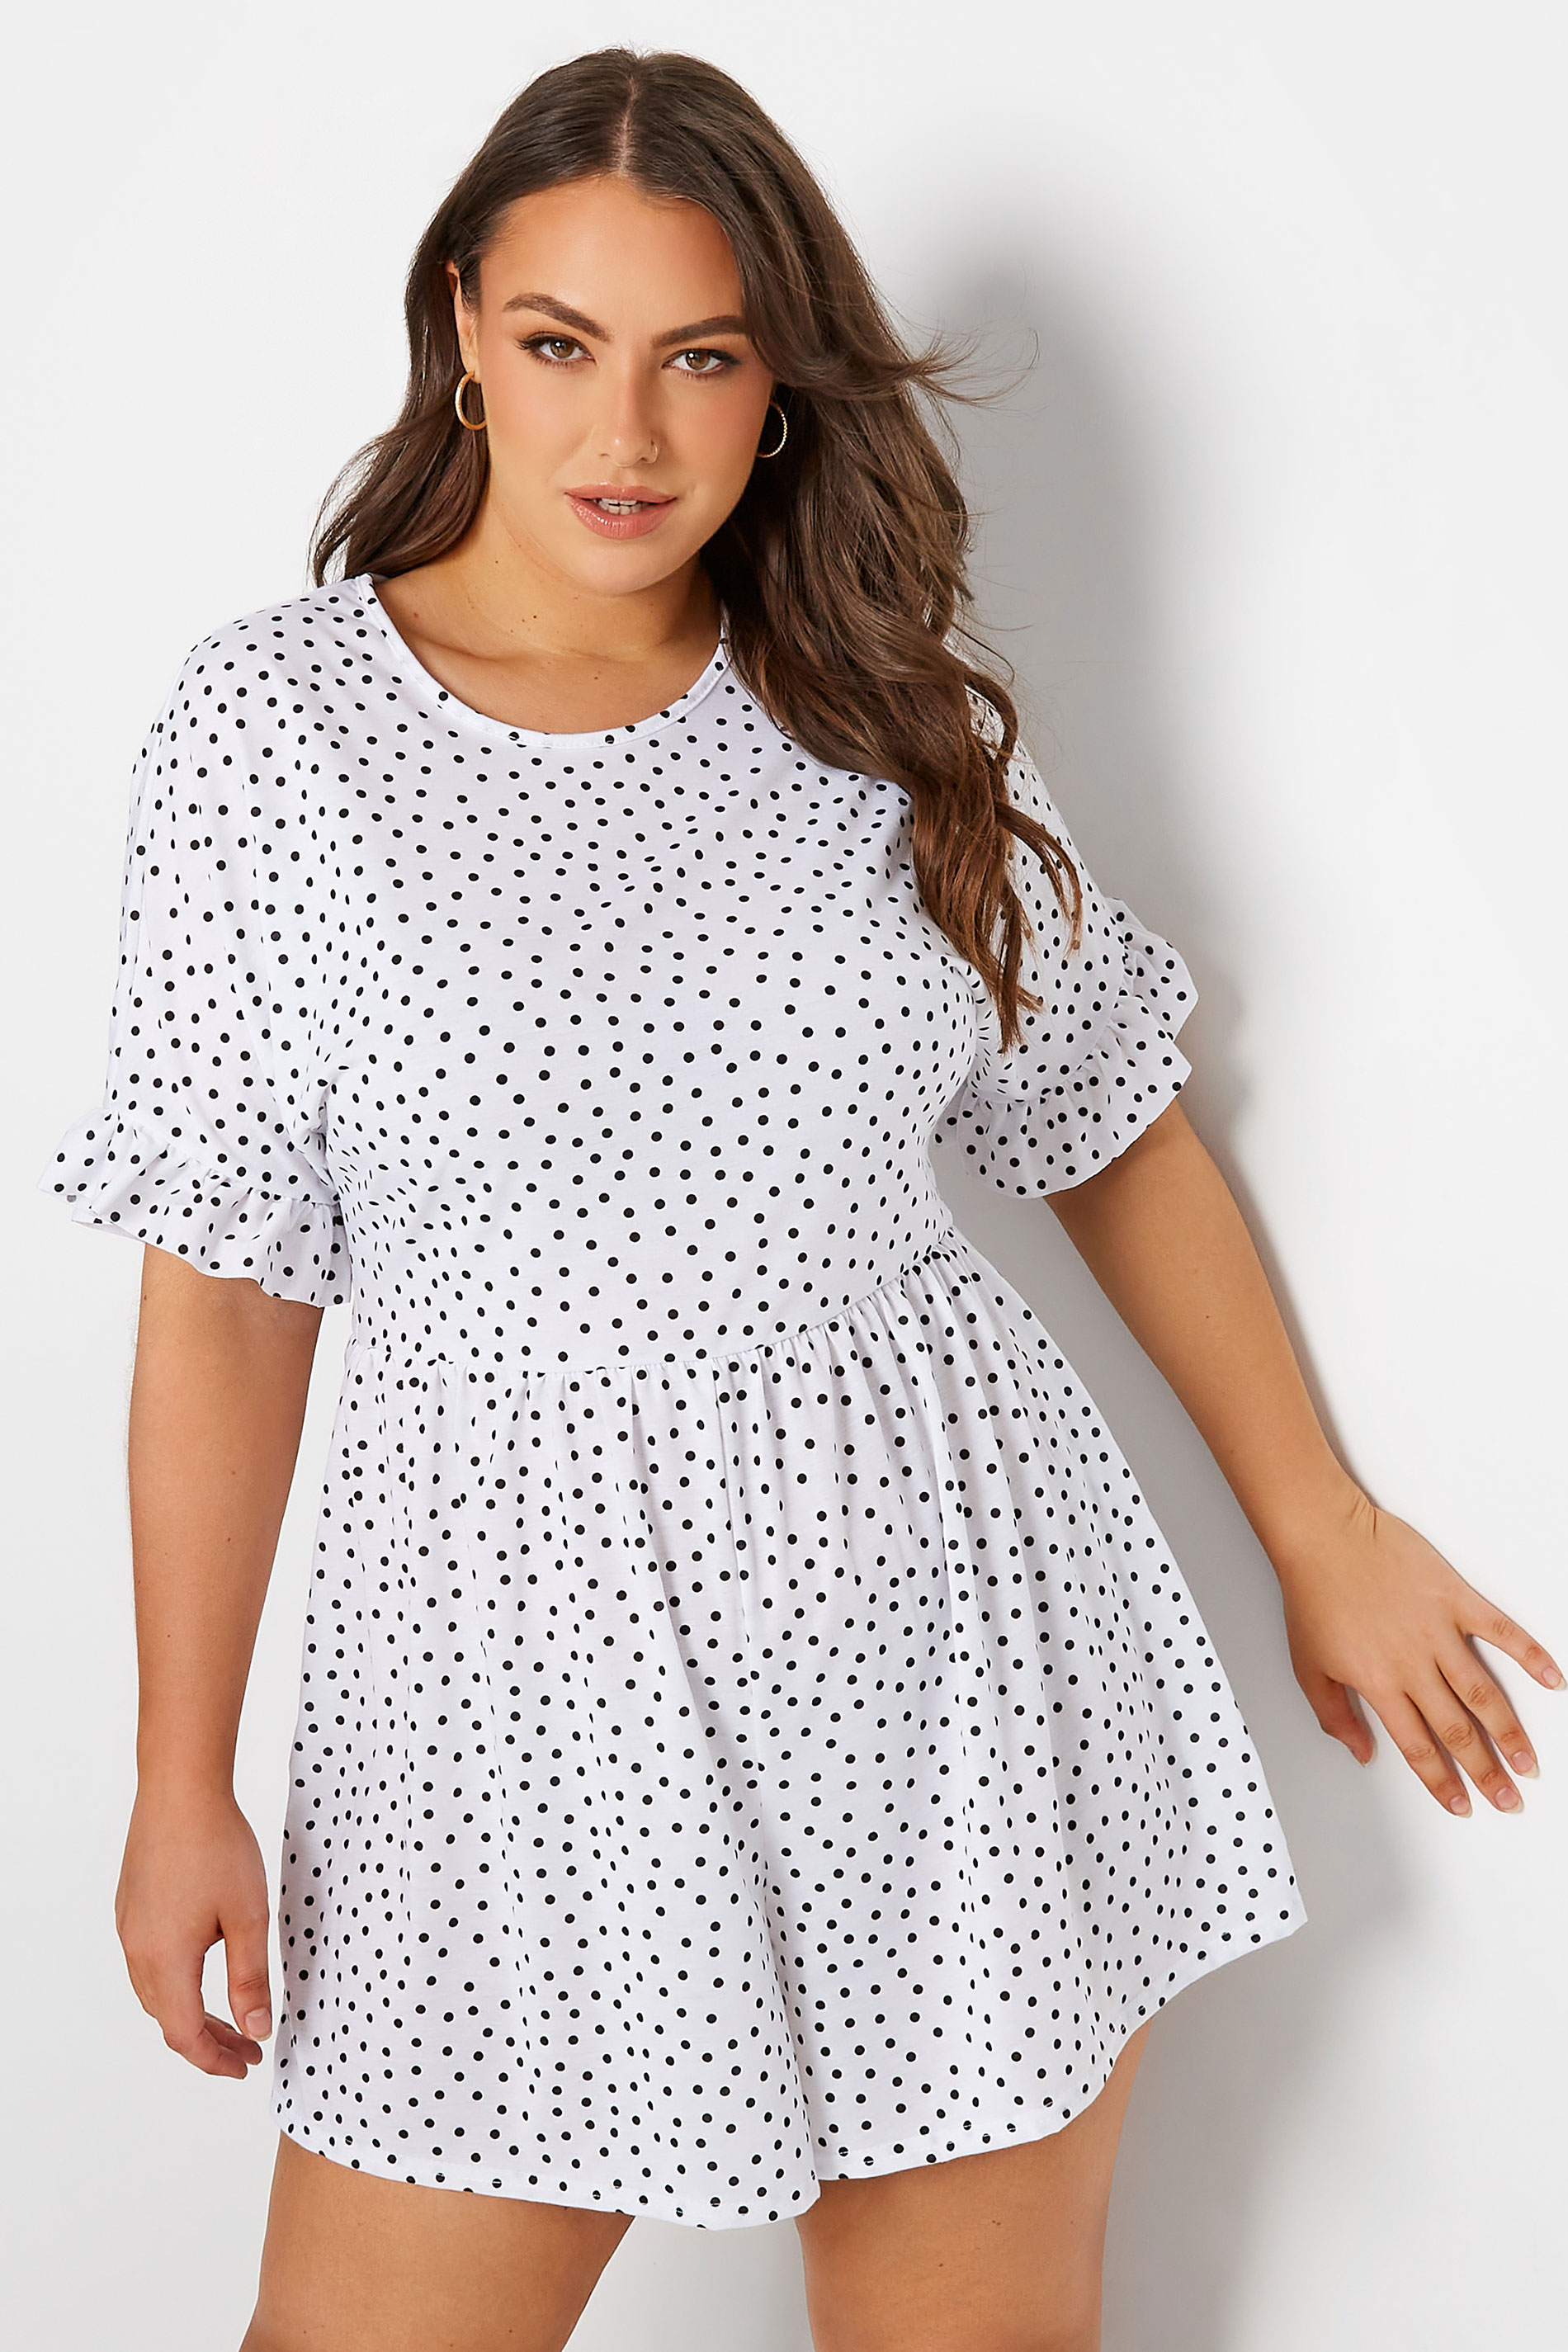 LIMITED COLLECTION Curve White & Black Polka Dot Playsuit 1